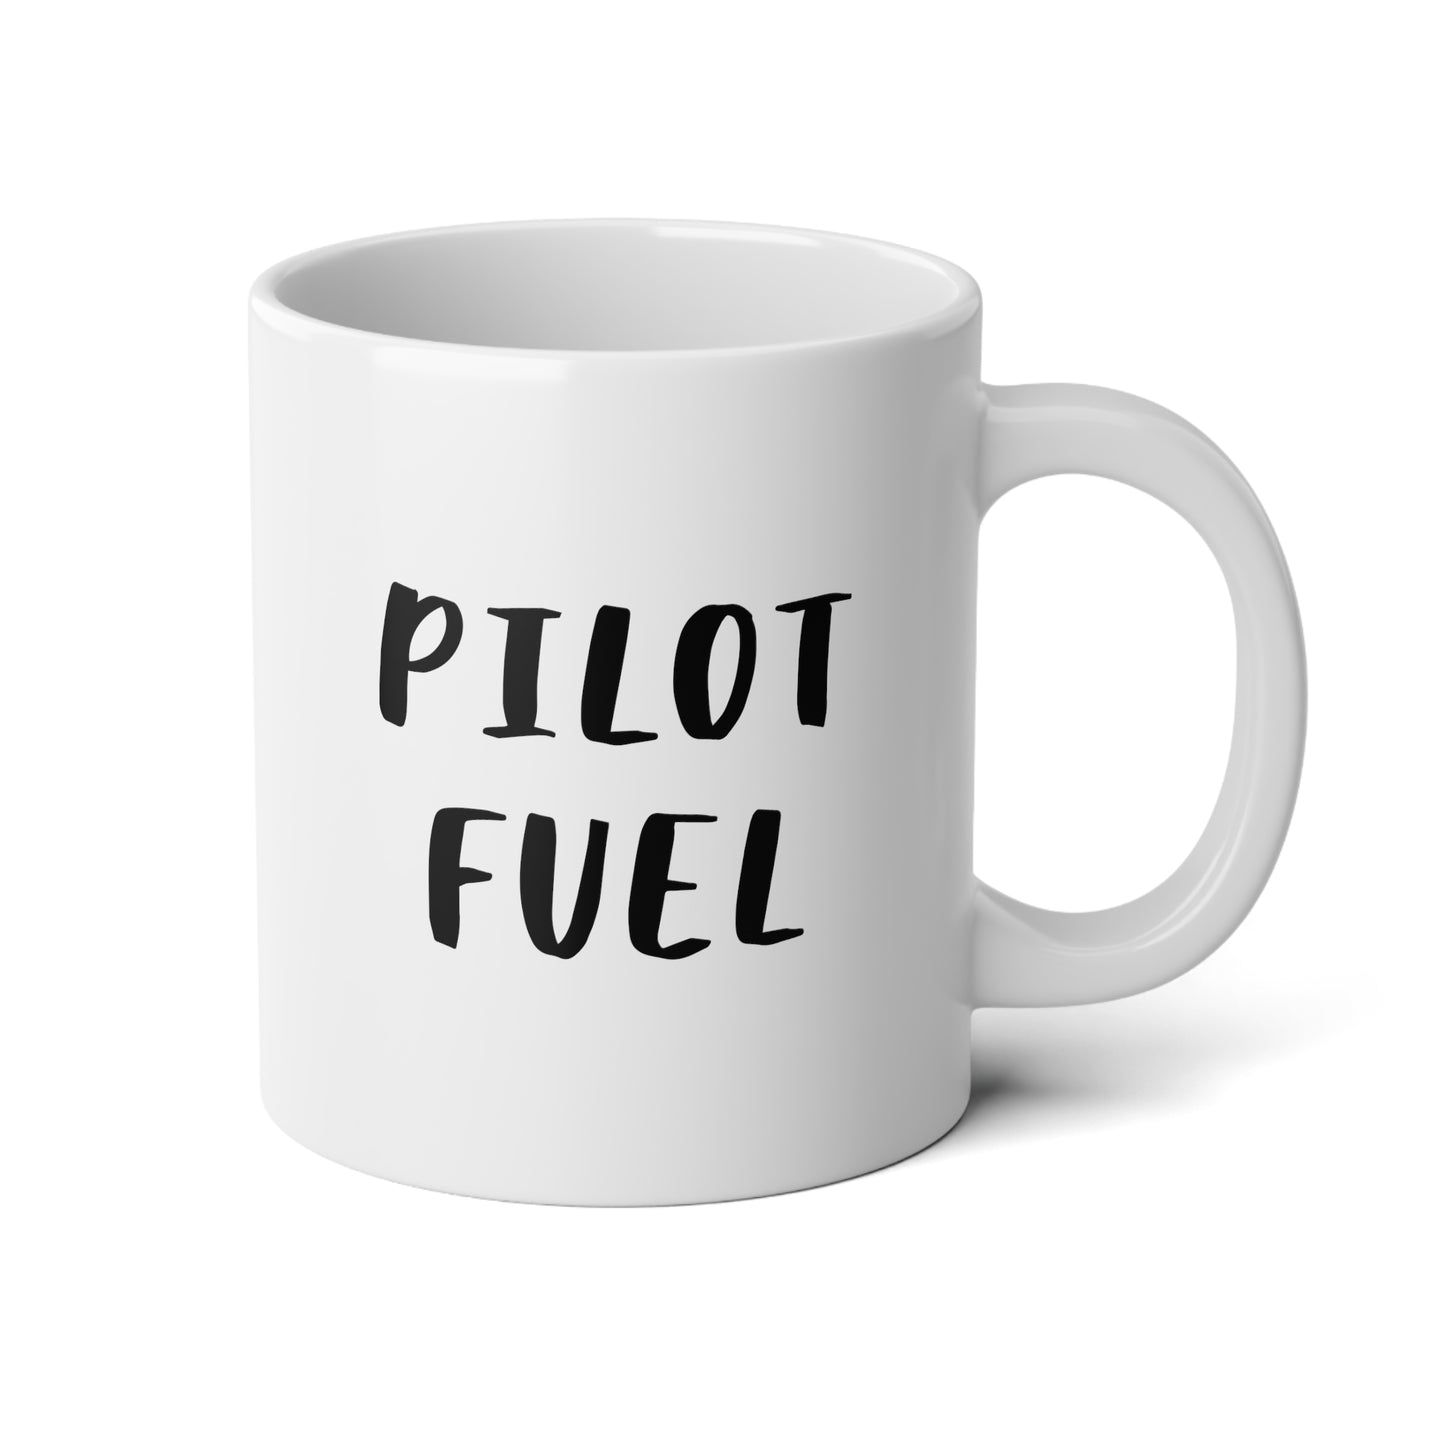 Pilot Fuel 20oz white funny large coffee mug gift for world's best pilot present wavey wares wavywares wavy wares